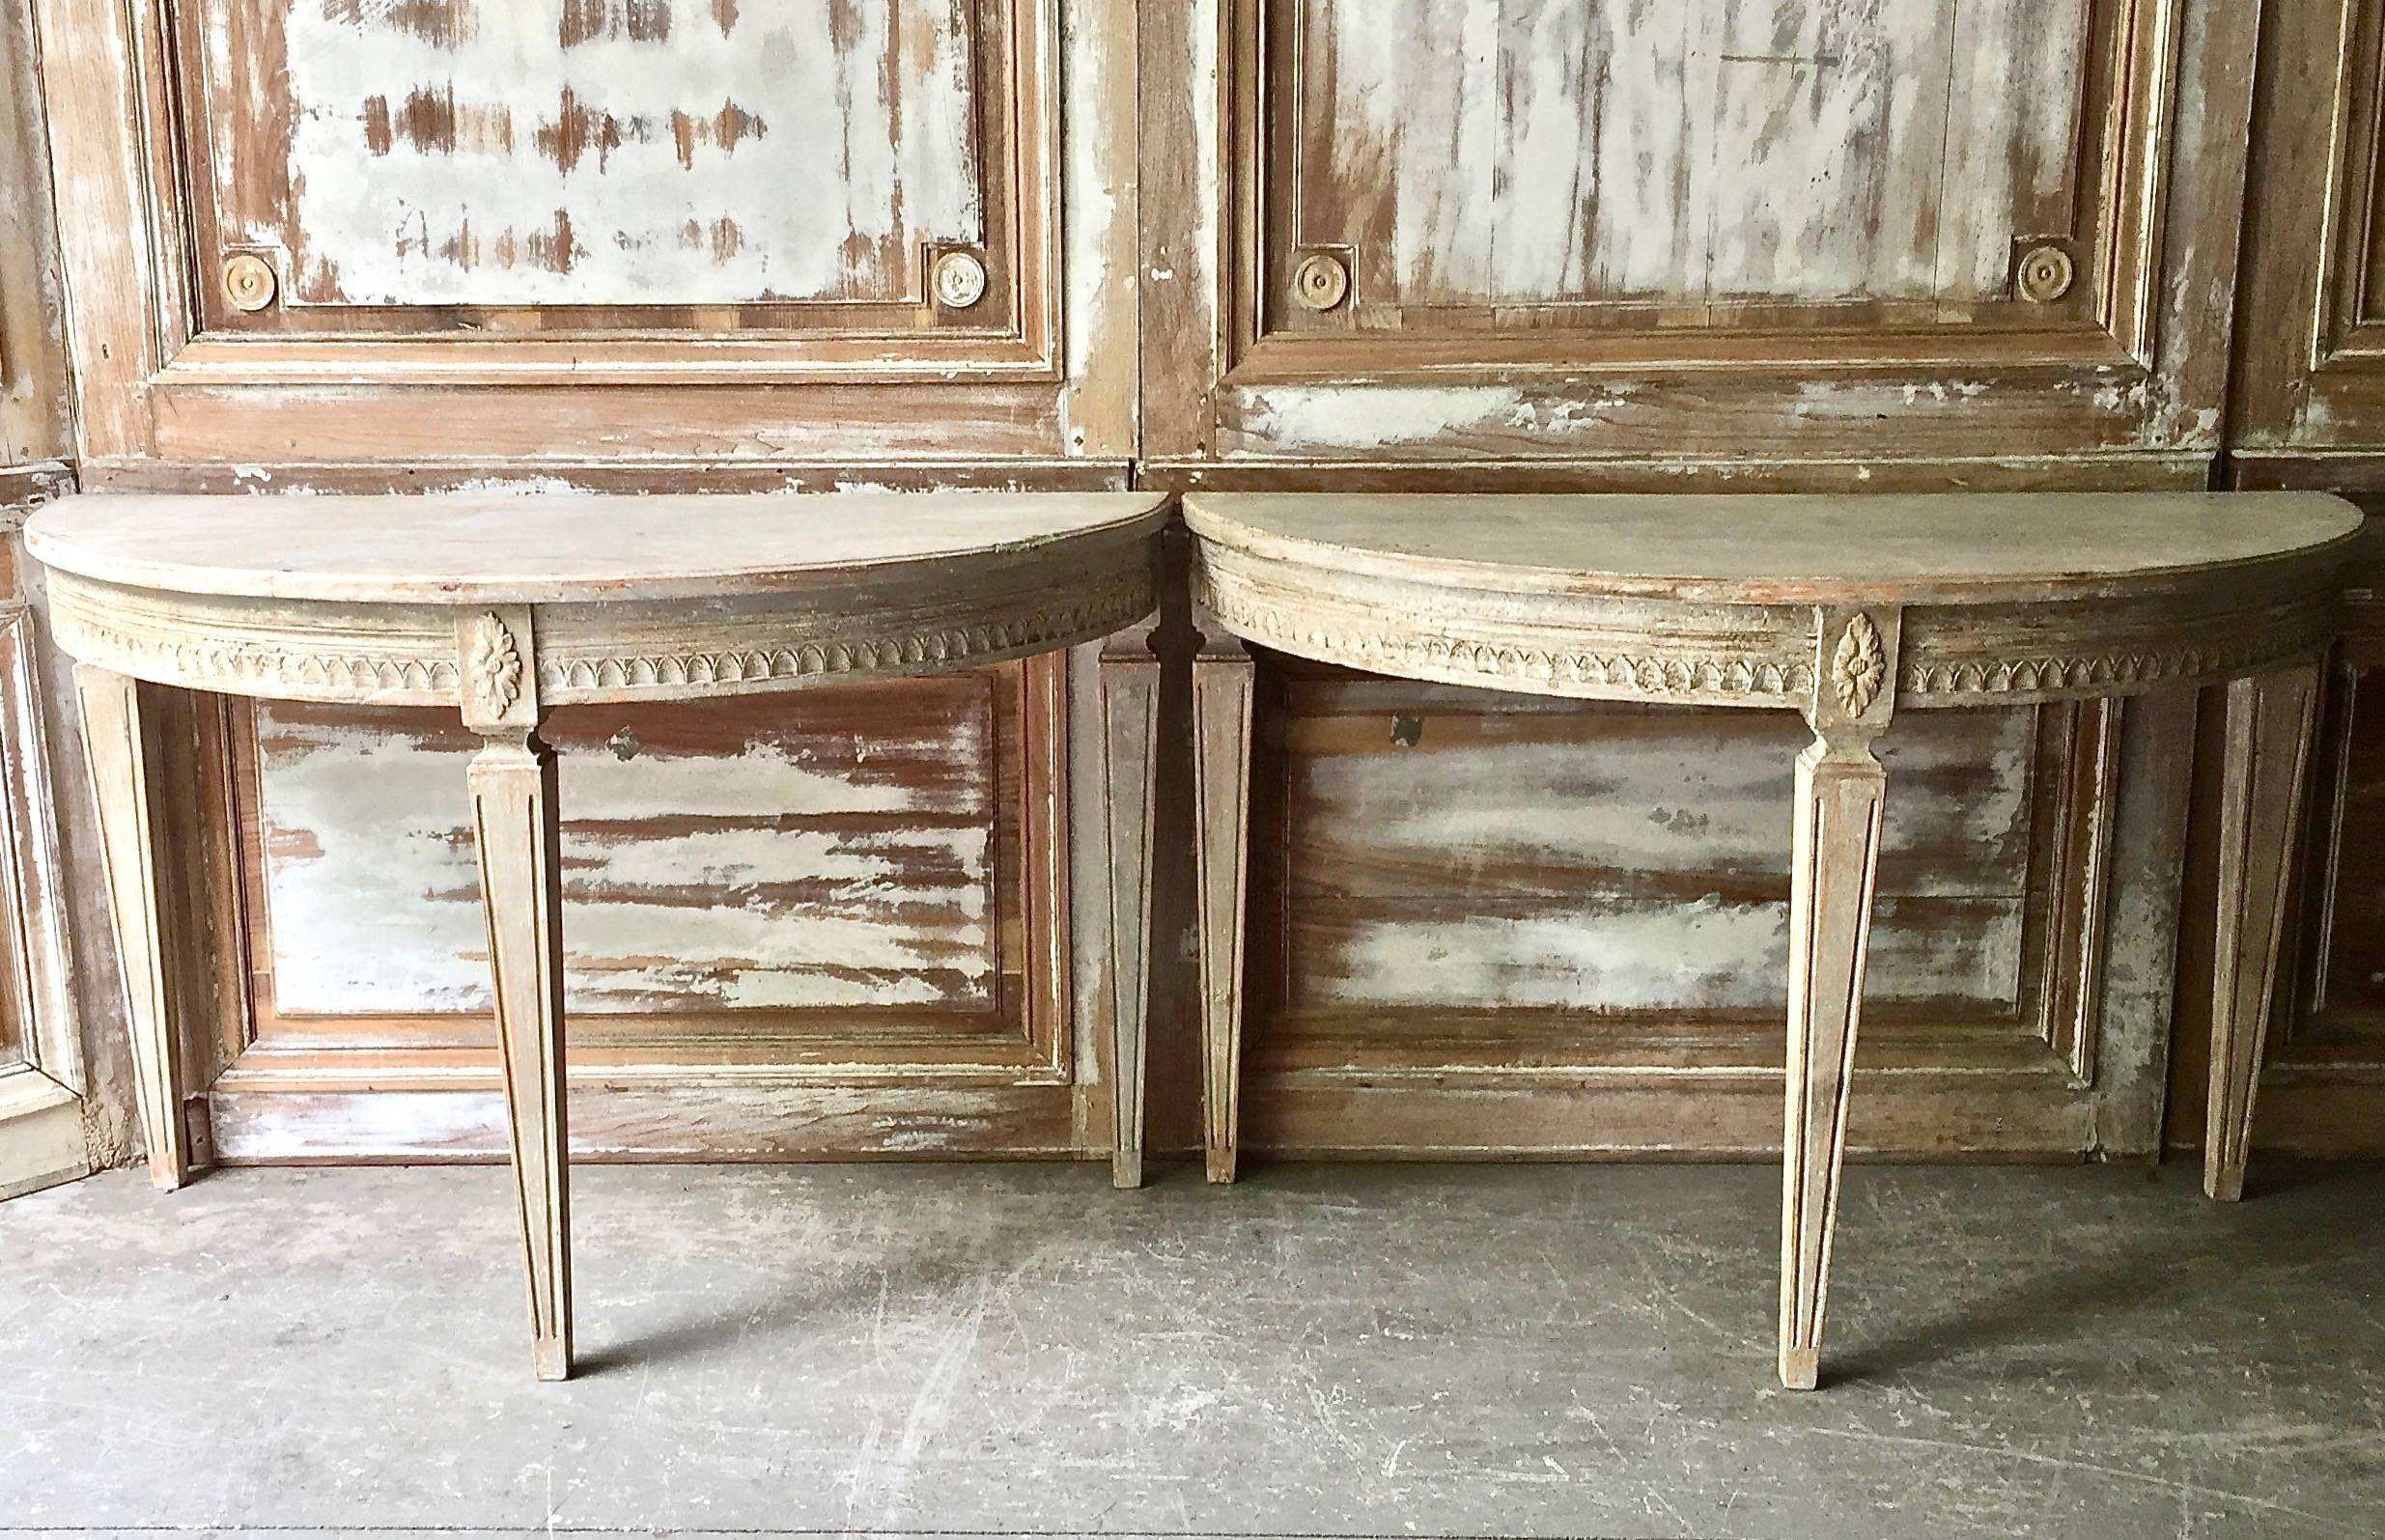 Pair of Swedish Gustavian period demilune console tables beautifully carved apron with lamb's tongue molding and florets on the corner blocks. Elegant tapered and fluted legs.
Stockholm, Sweden, circa 1820.
More than ever, we selected the best,